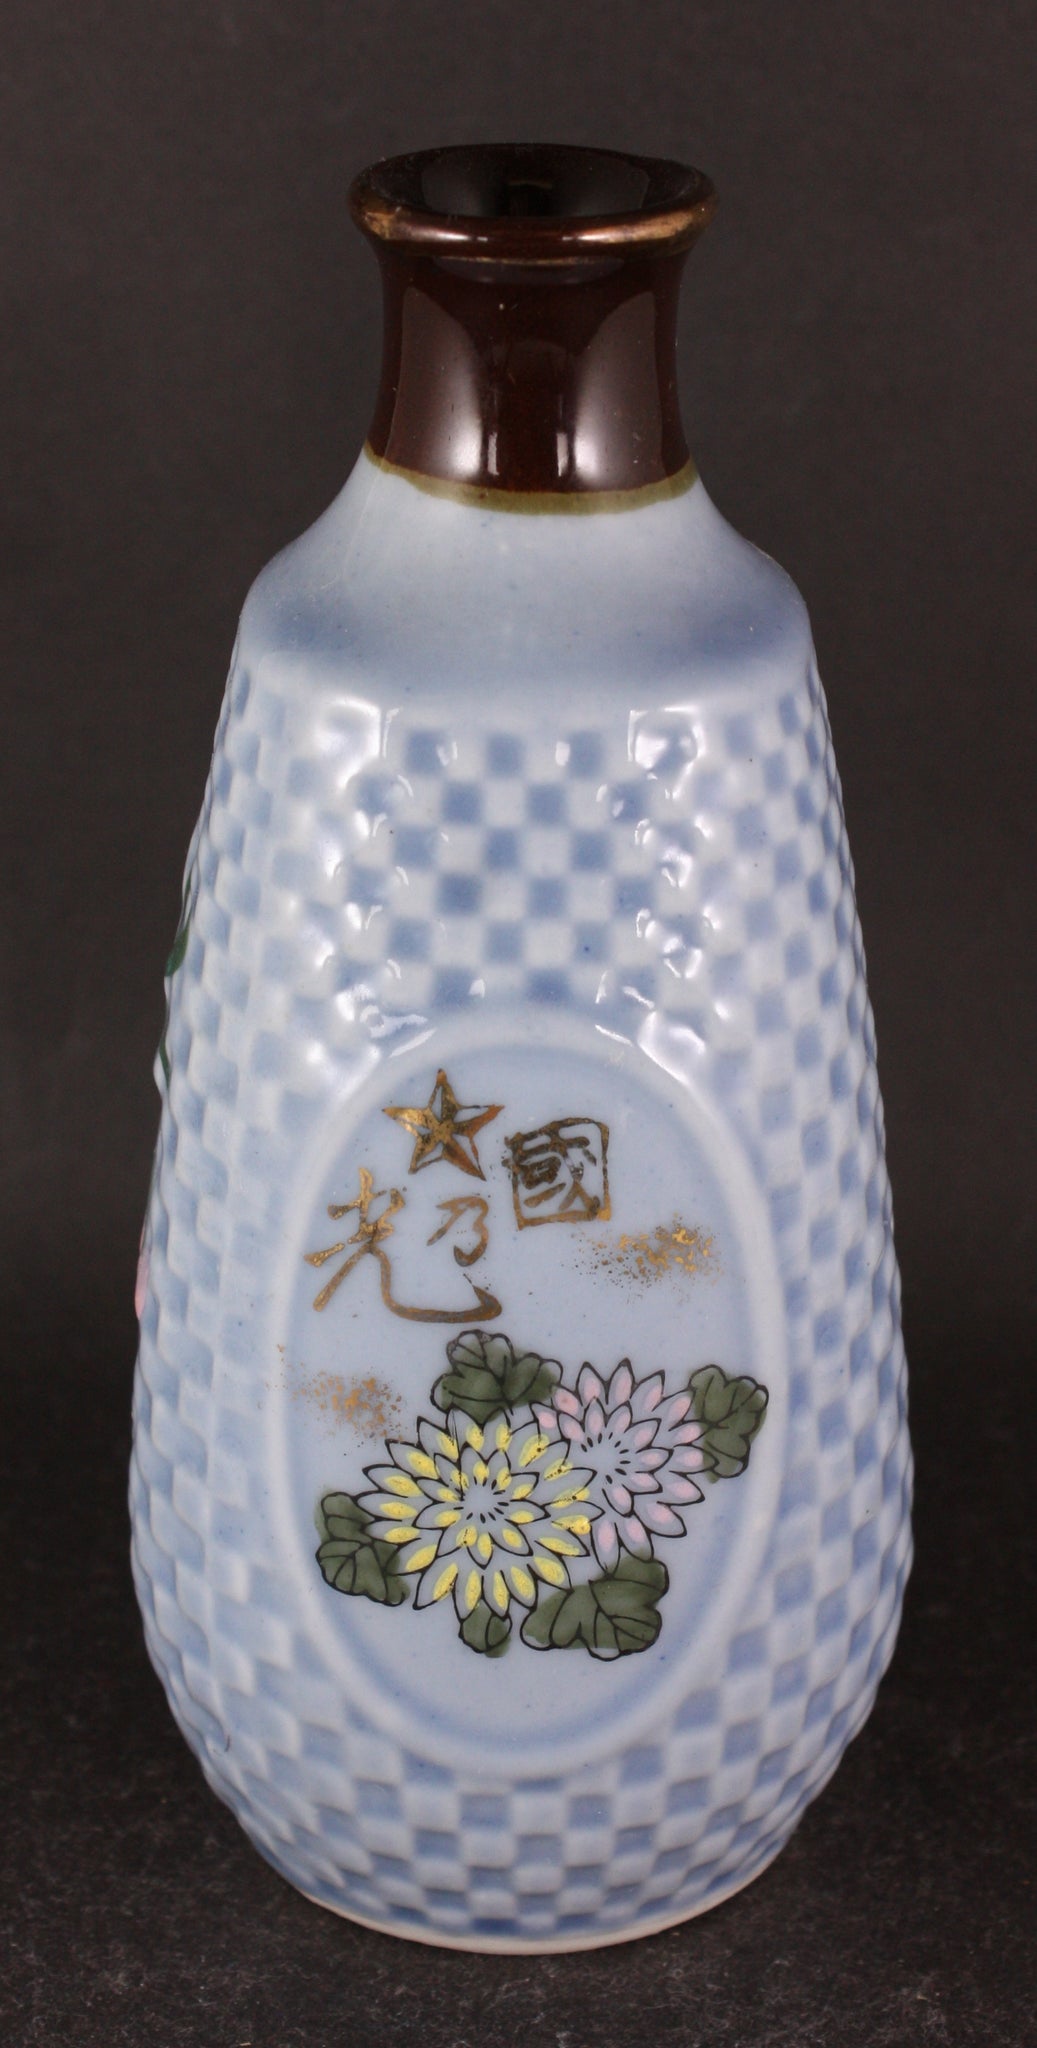 Antique Japanese Military Chrysanthemums Glory of the Nation Army Sake Bottle